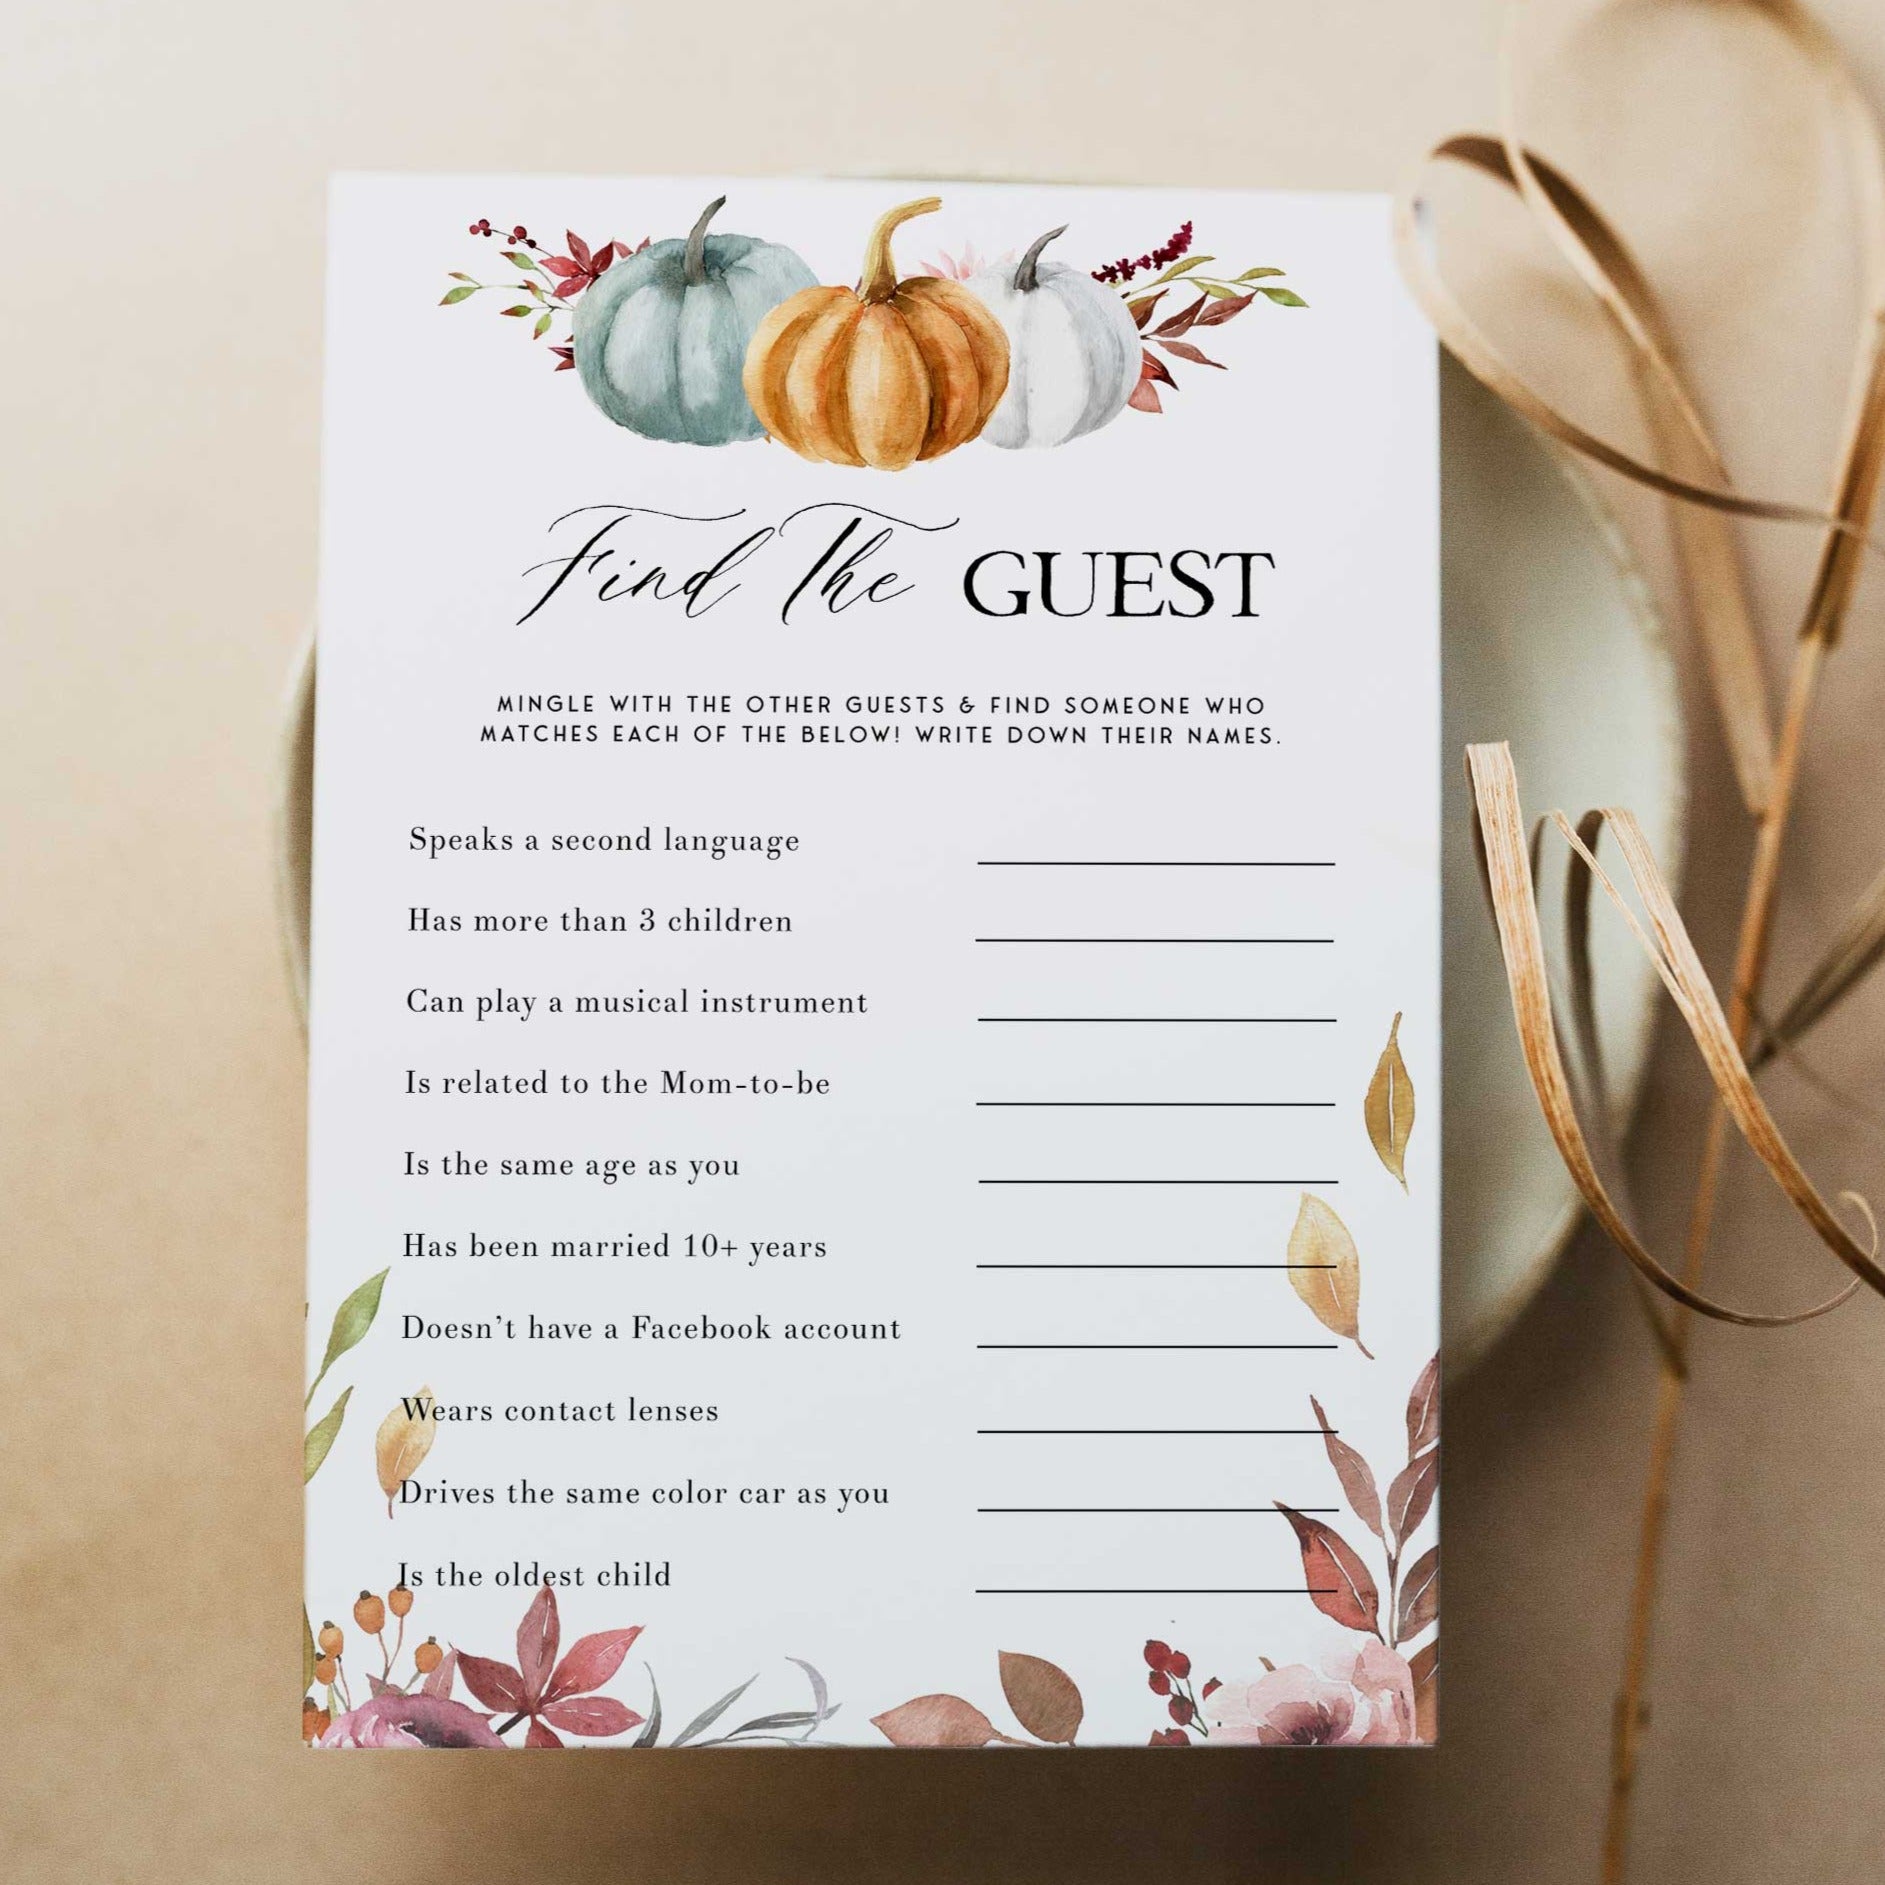 Fully editable and printable baby shower find the guest game with a fall pumpkin design. Perfect for a Fall Pumpkin baby shower themed party